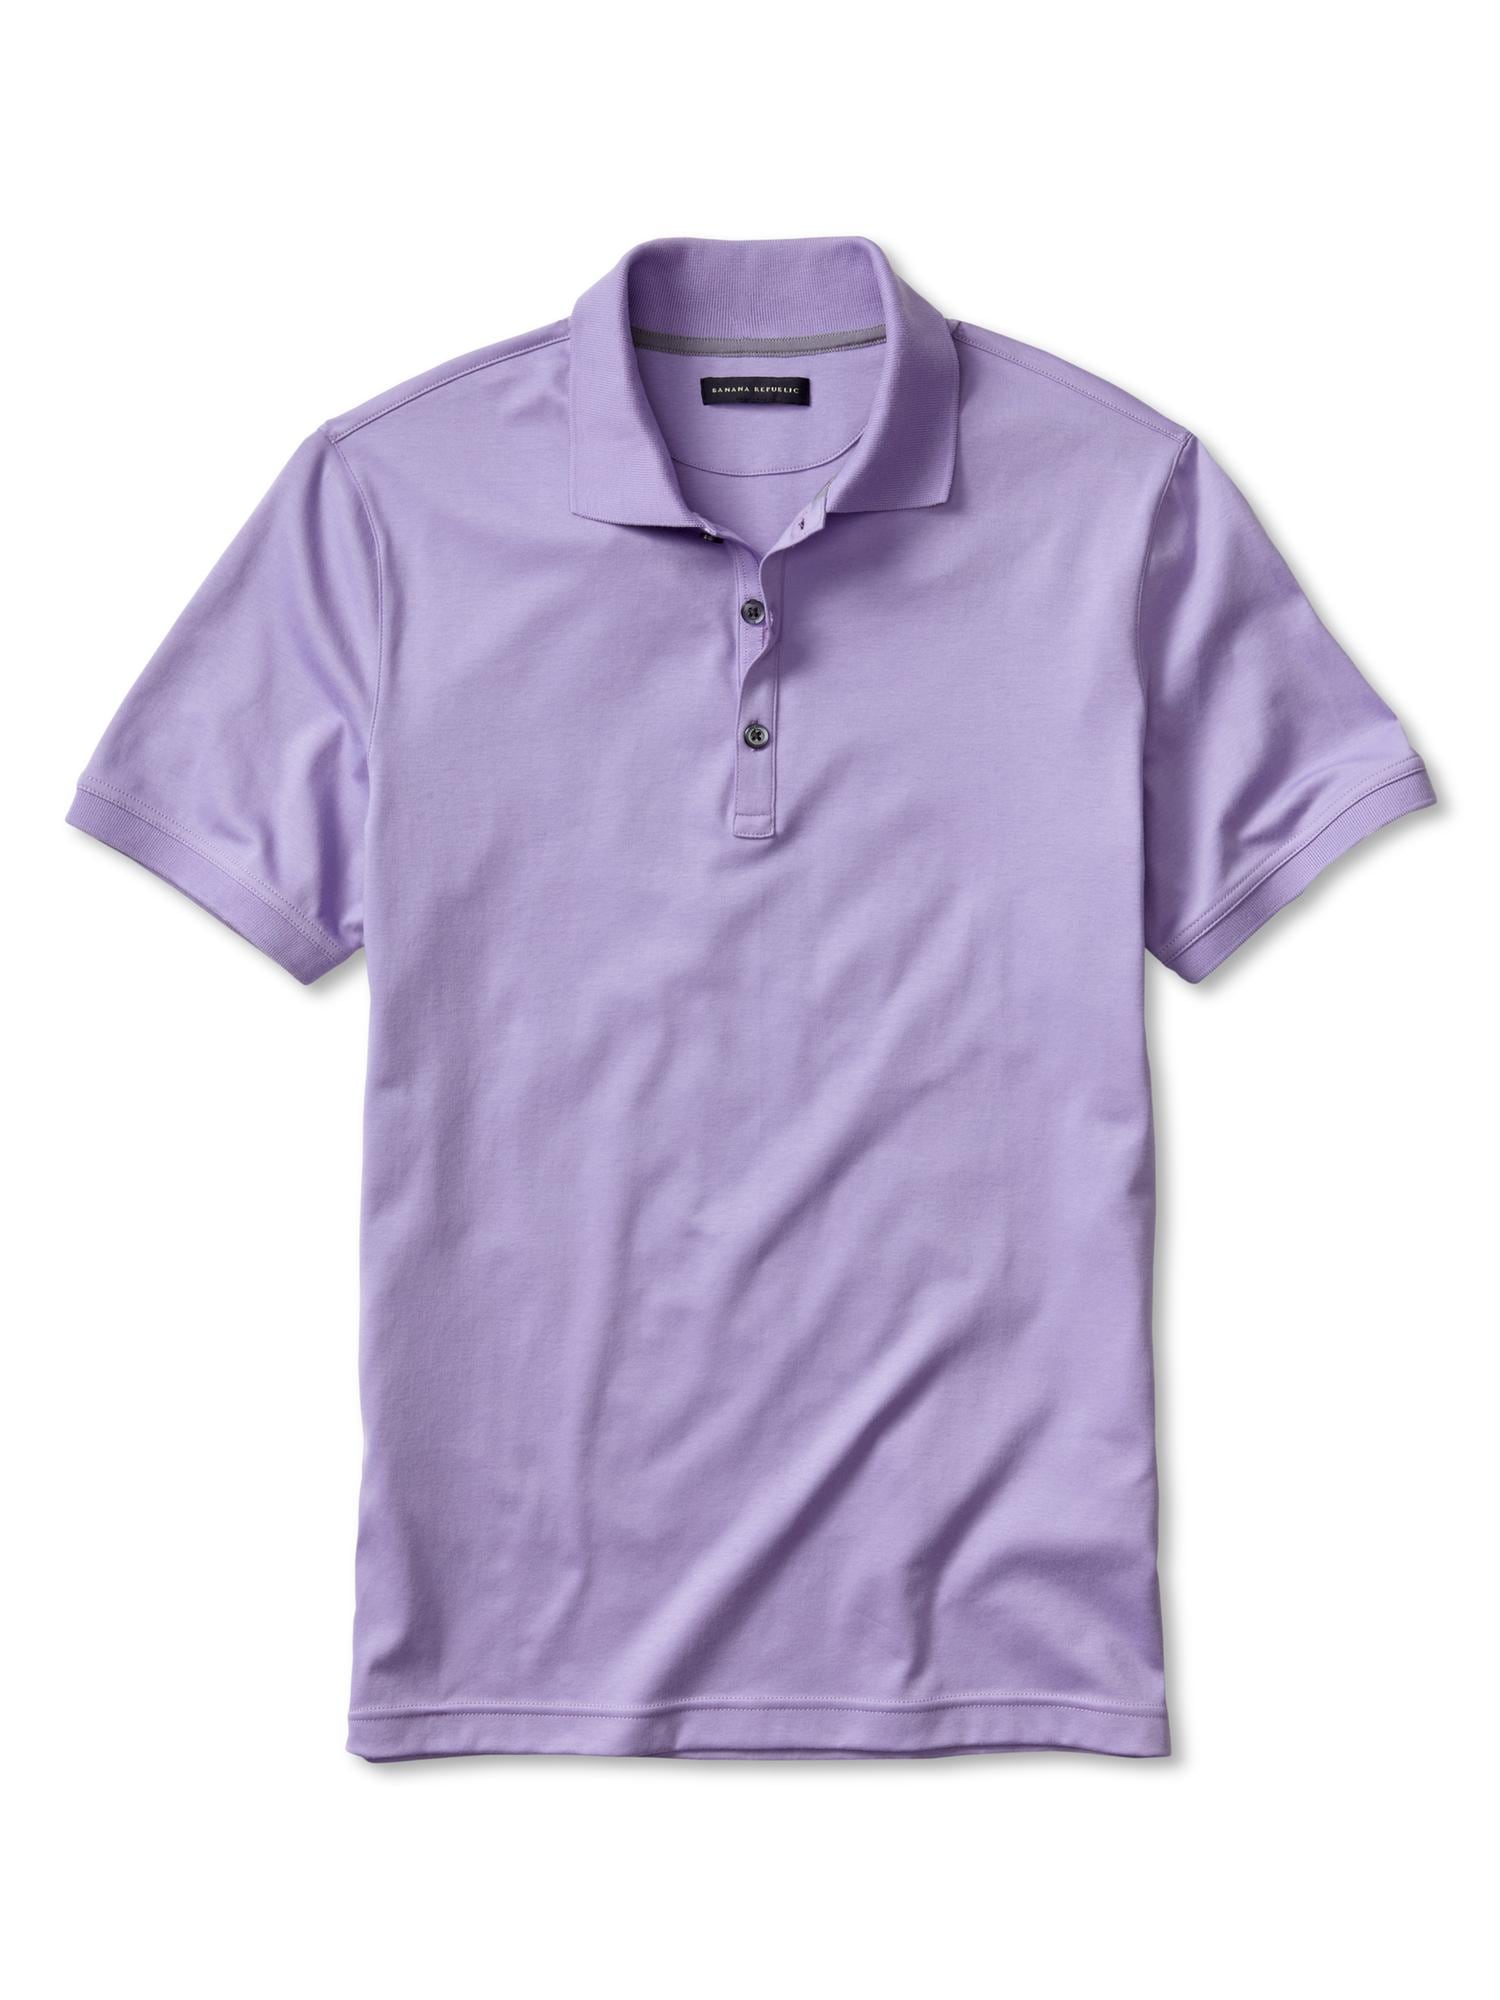 Luxe-touch cotton solid polo